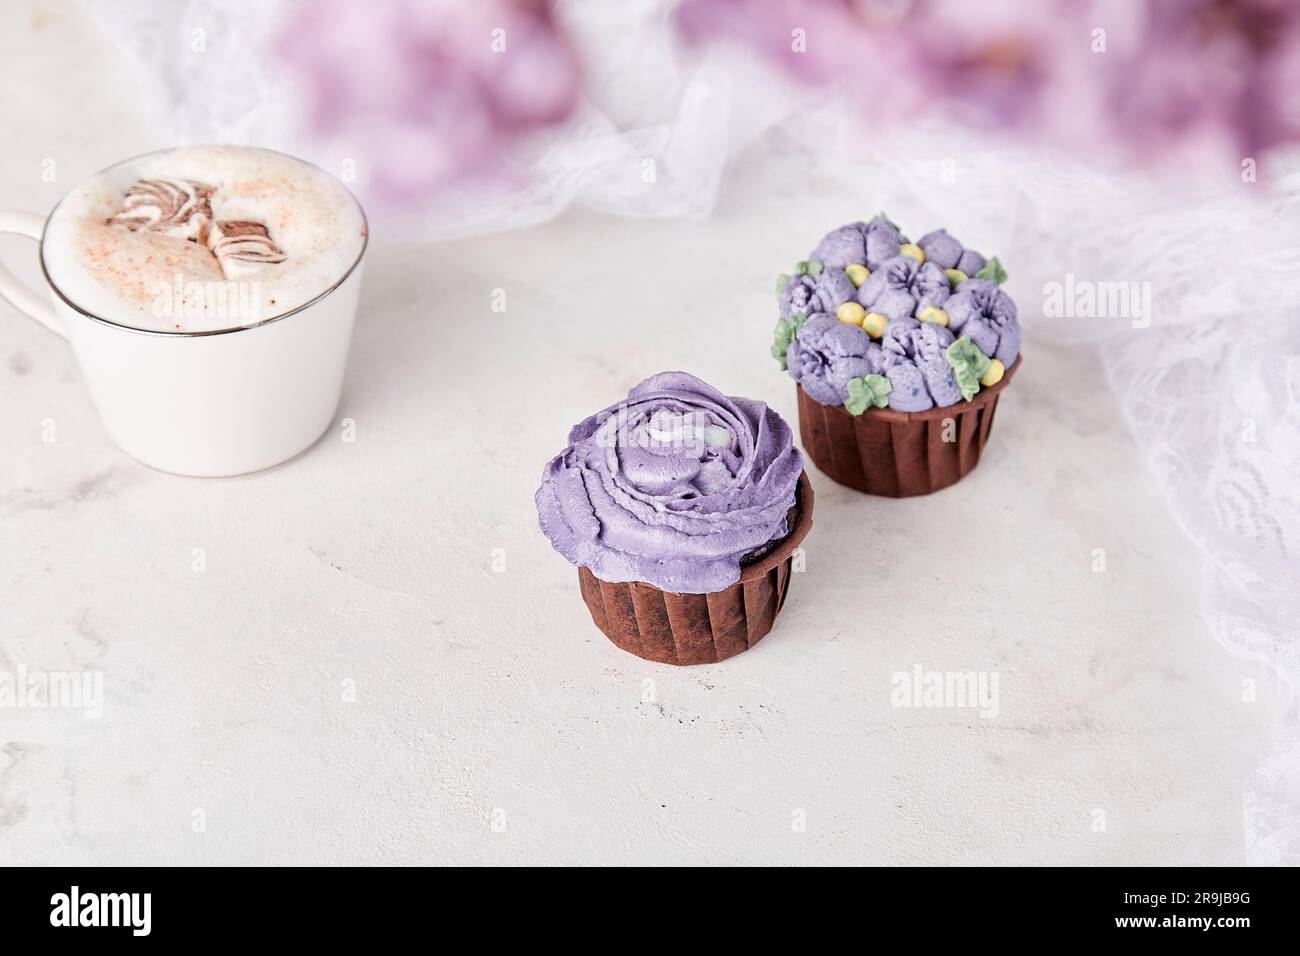 Floral delicate french purple cupcakes using trend Dreamy Escapism. Aesthetics desserts, coffee cup and lilac flowers background Stock Photo